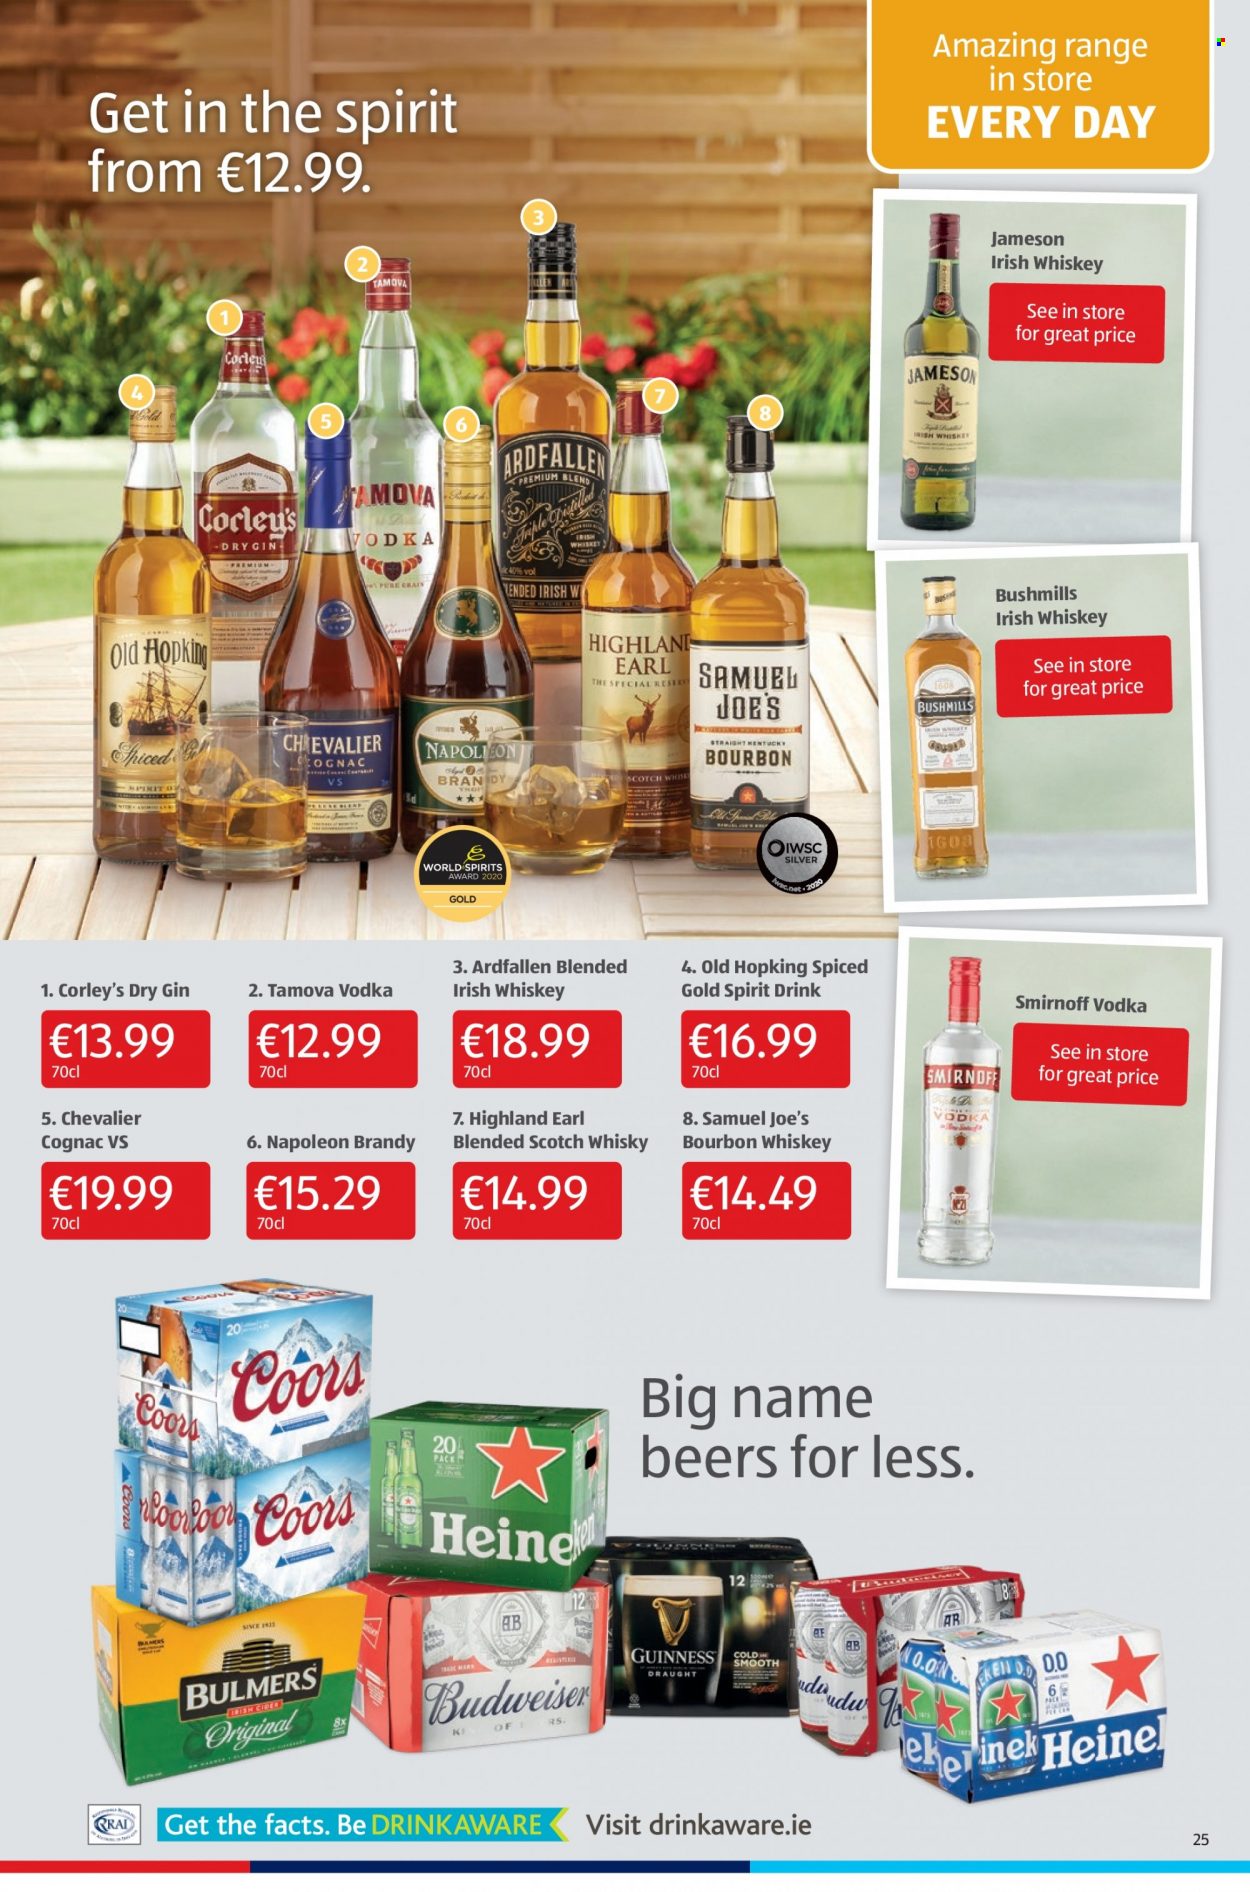 thumbnail - Aldi offer  - 16.09.2021 - 22.09.2021 - Sales products - bourbon, brandy, cognac, gin, Smirnoff, vodka, whiskey, irish whiskey, Jameson, bourbon whiskey, scotch whisky, whisky, cider, beer, Bulmers, Guinness, Budweiser, Coors. Page 25.